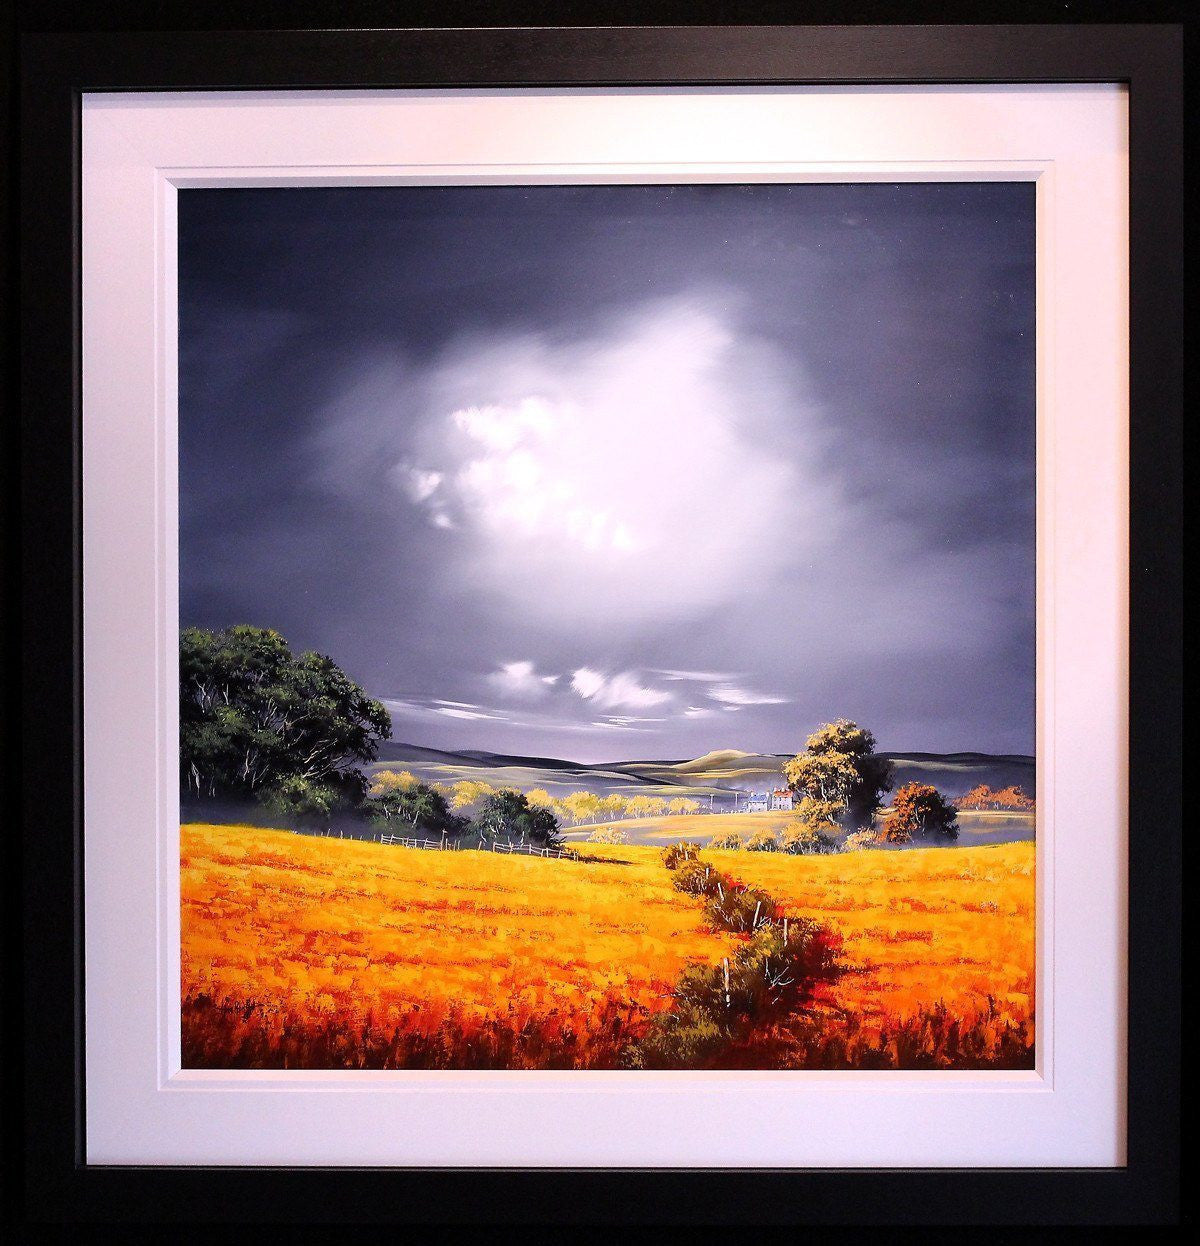 Over the Fields - SOLD Allan Morgan